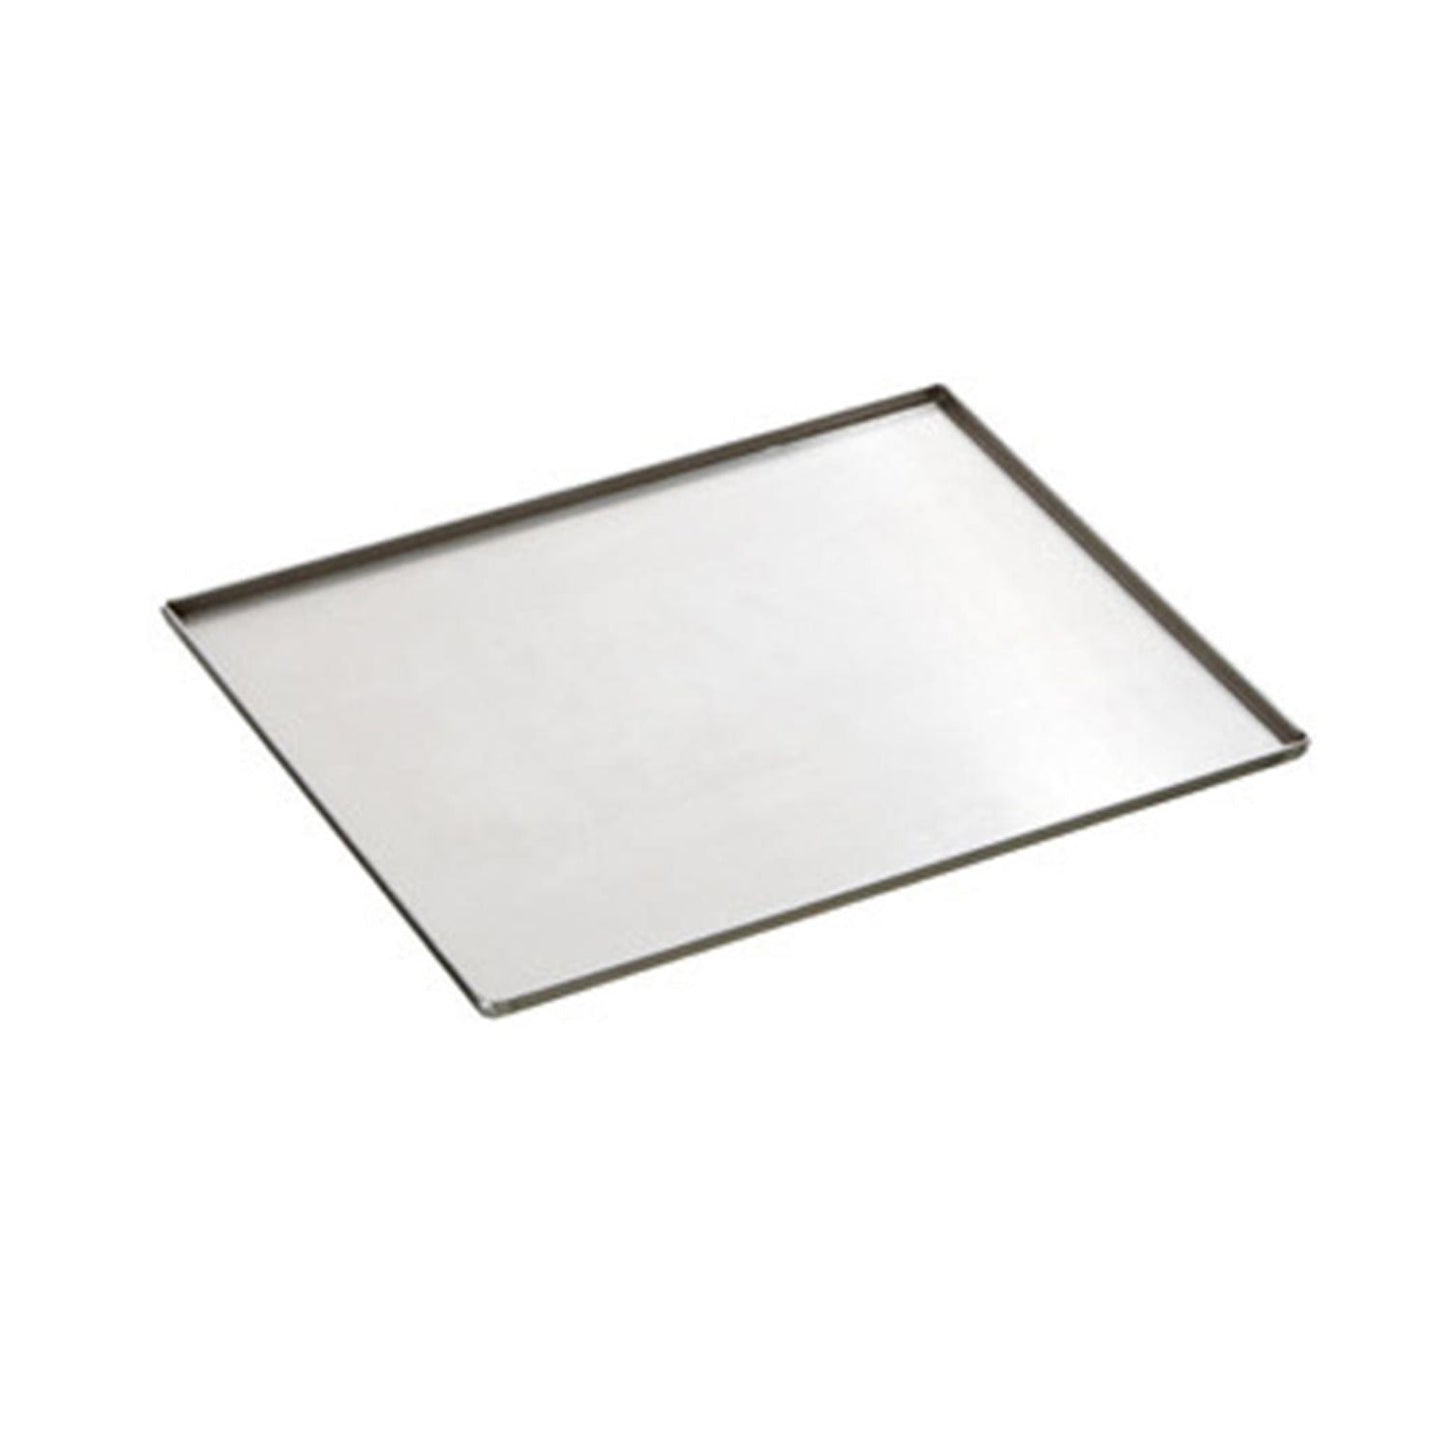 1 mm Stainless Steel Baking Tray - 425 x 300 x 25 mm - Small